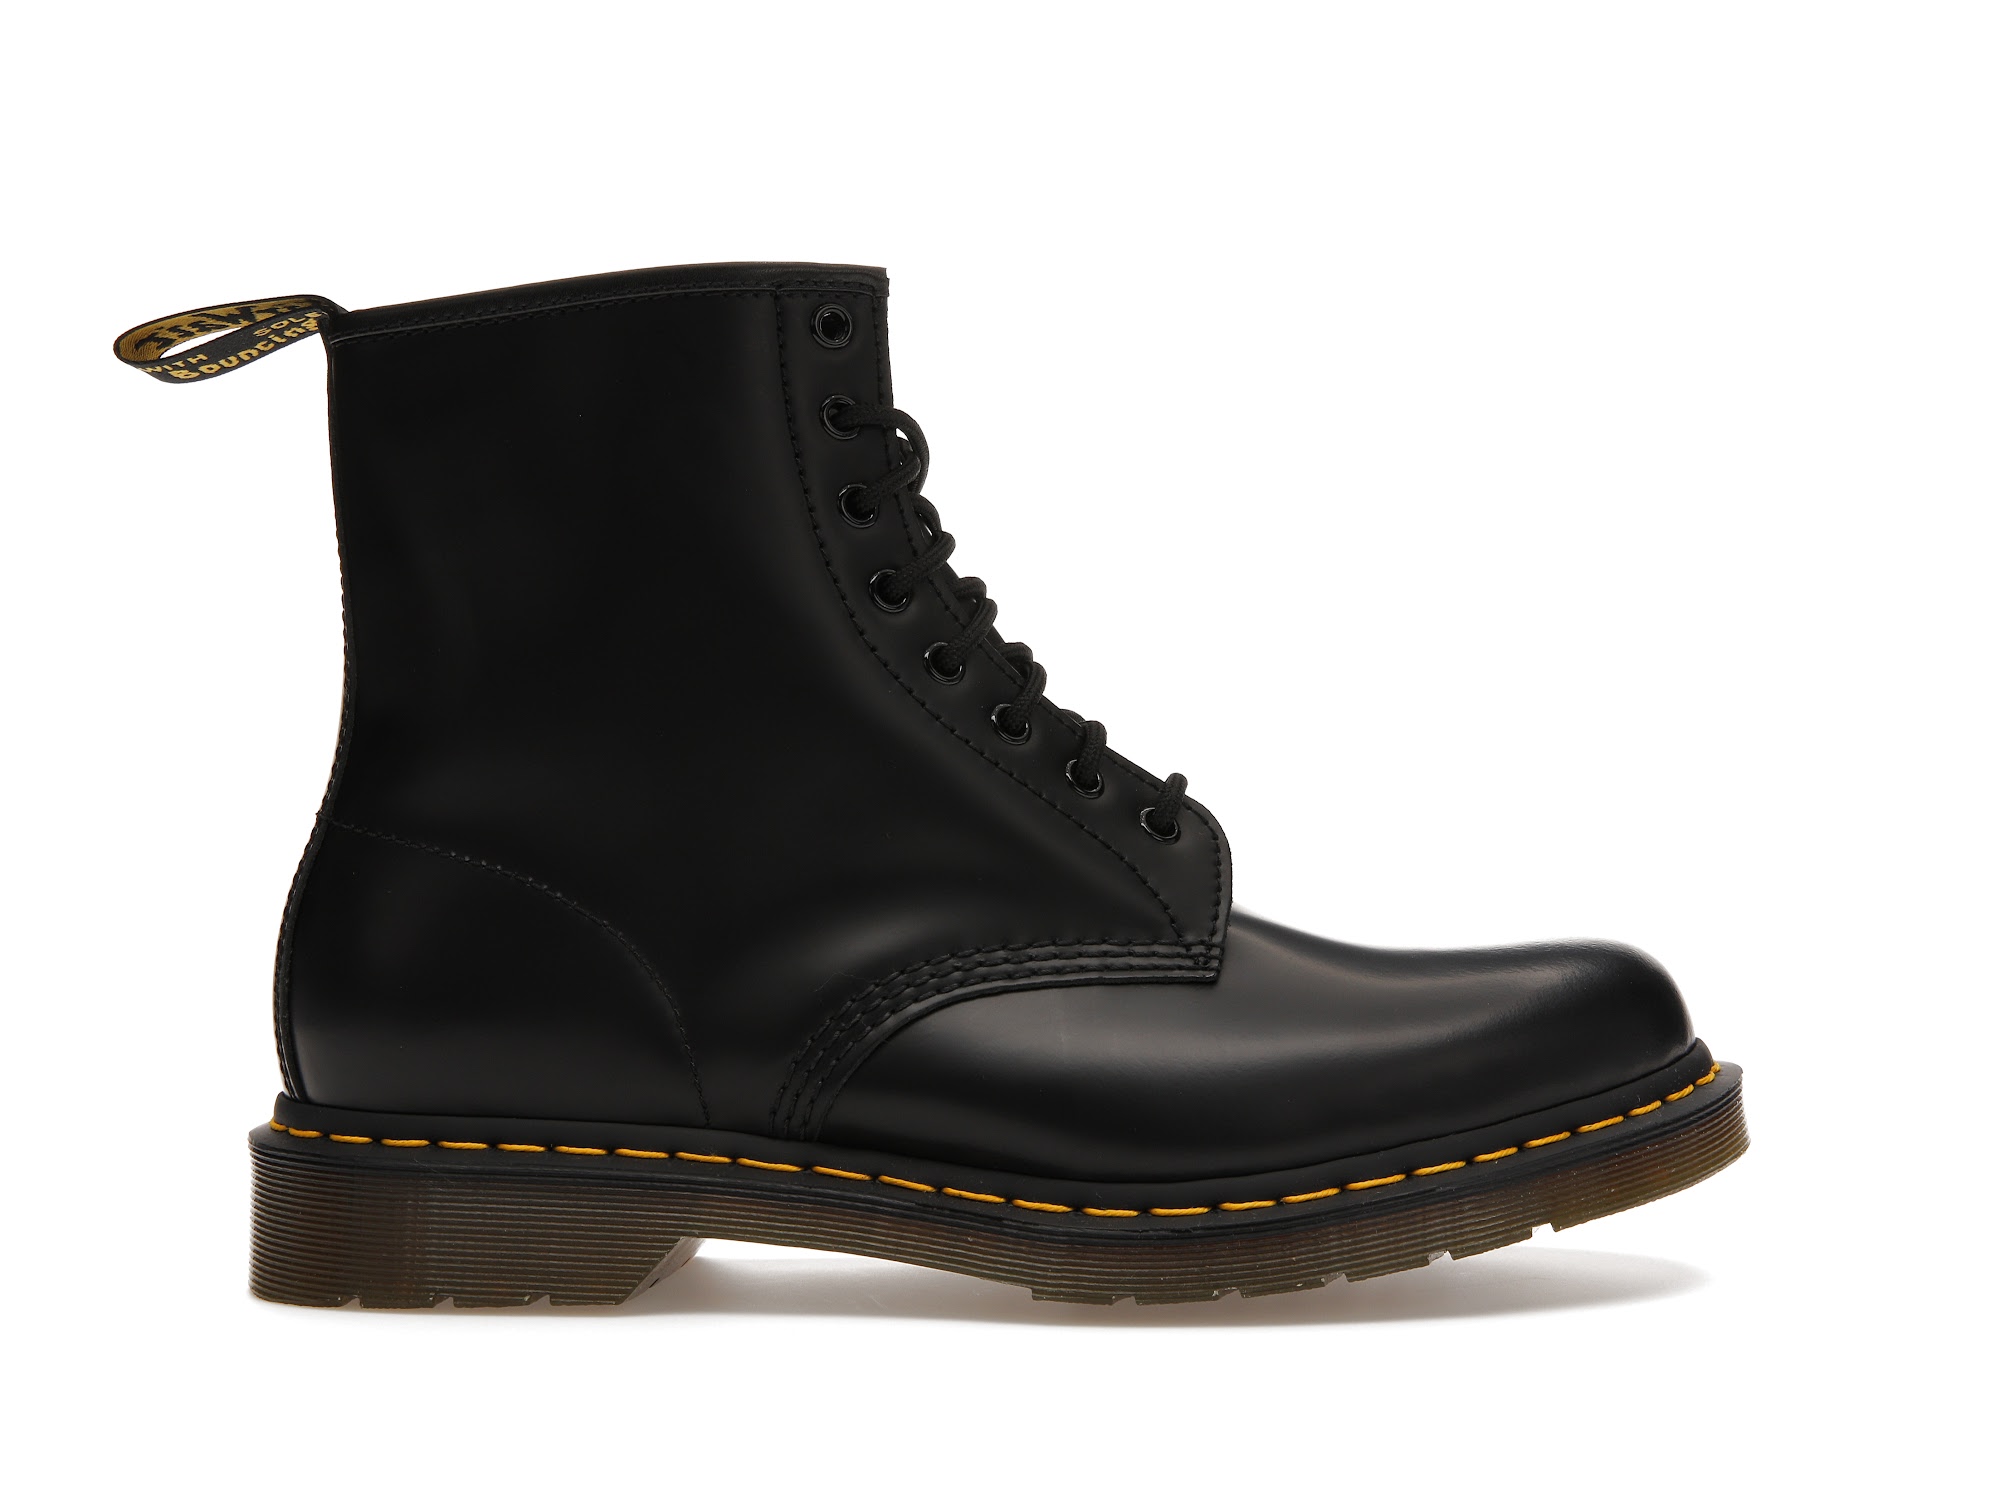 Dr. Martens 1460 Smooth Leather Lace Up Boot Black - 11822006 - US